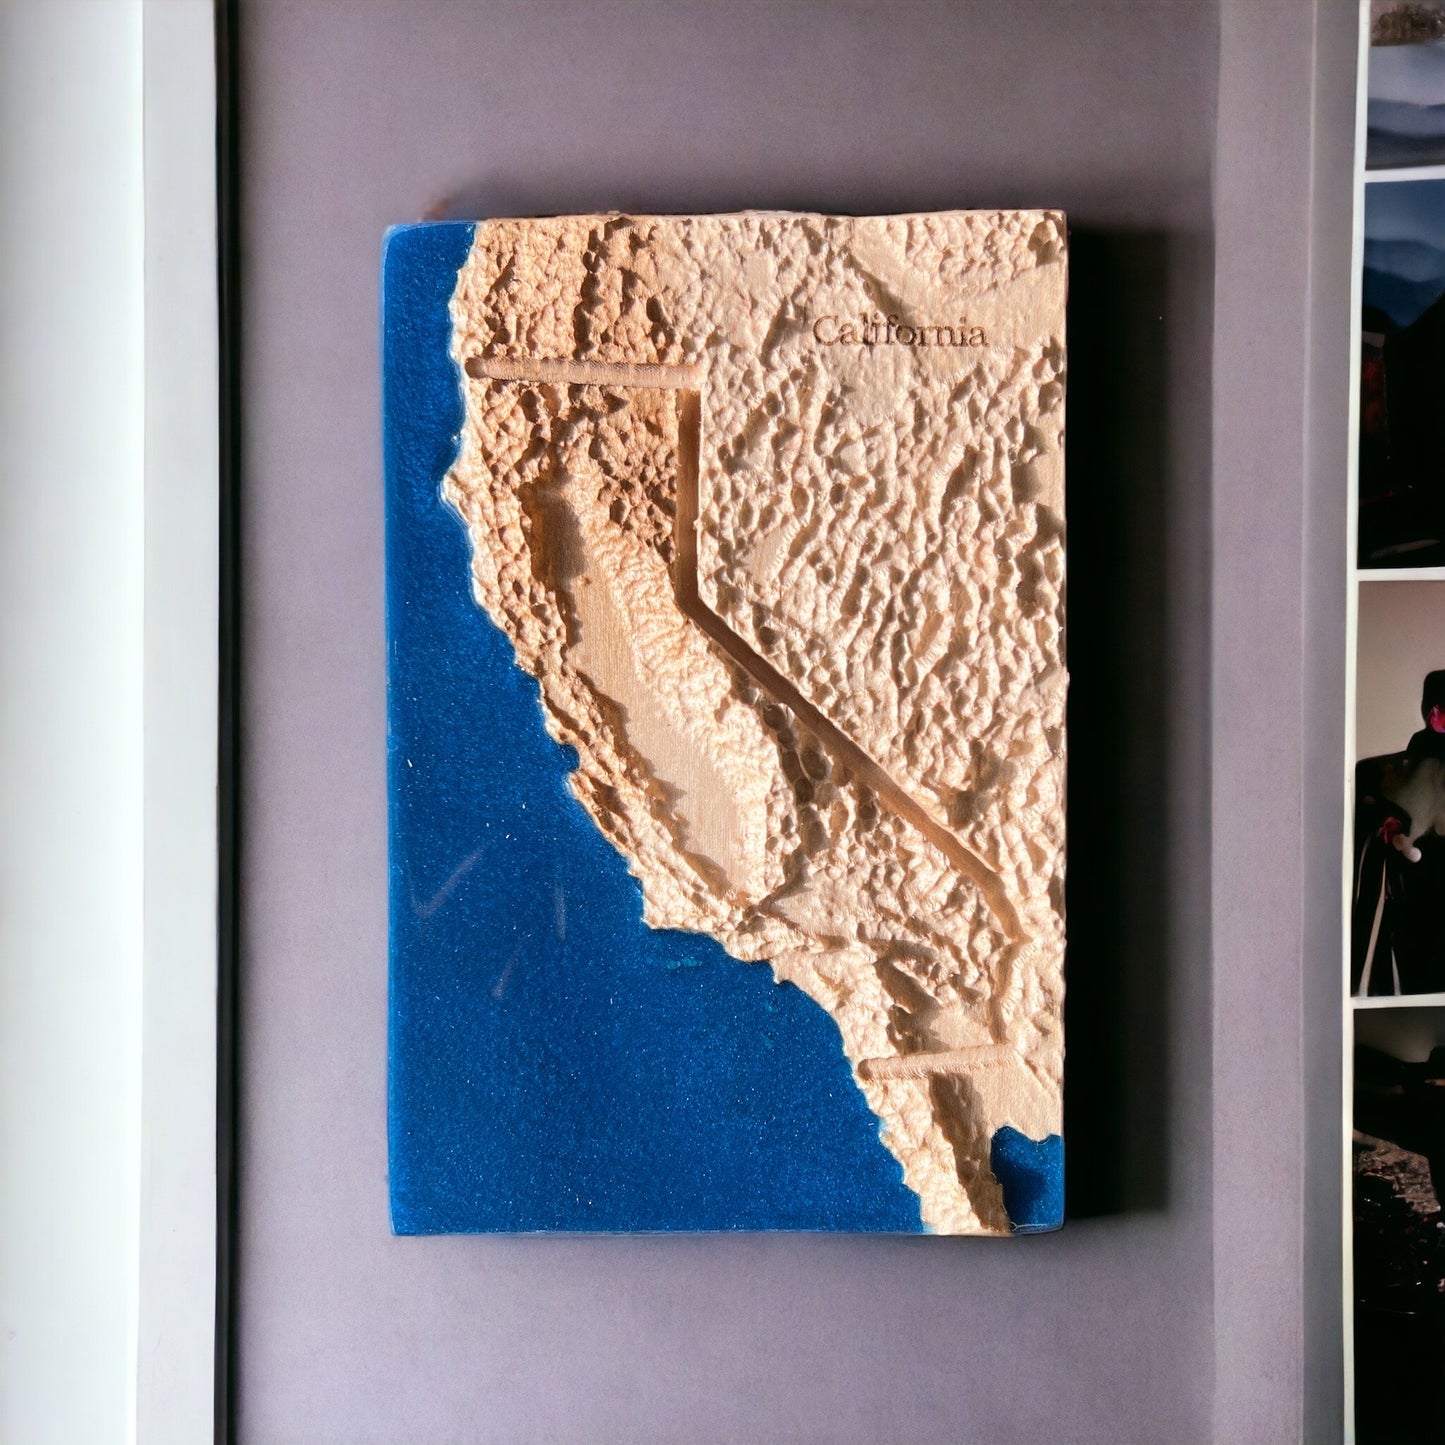 California 3D Relief Map | California Wood Epoxy Art | Los Angeles | San Francisco | Aerial View Map | Gift for Husband | Travel Gift